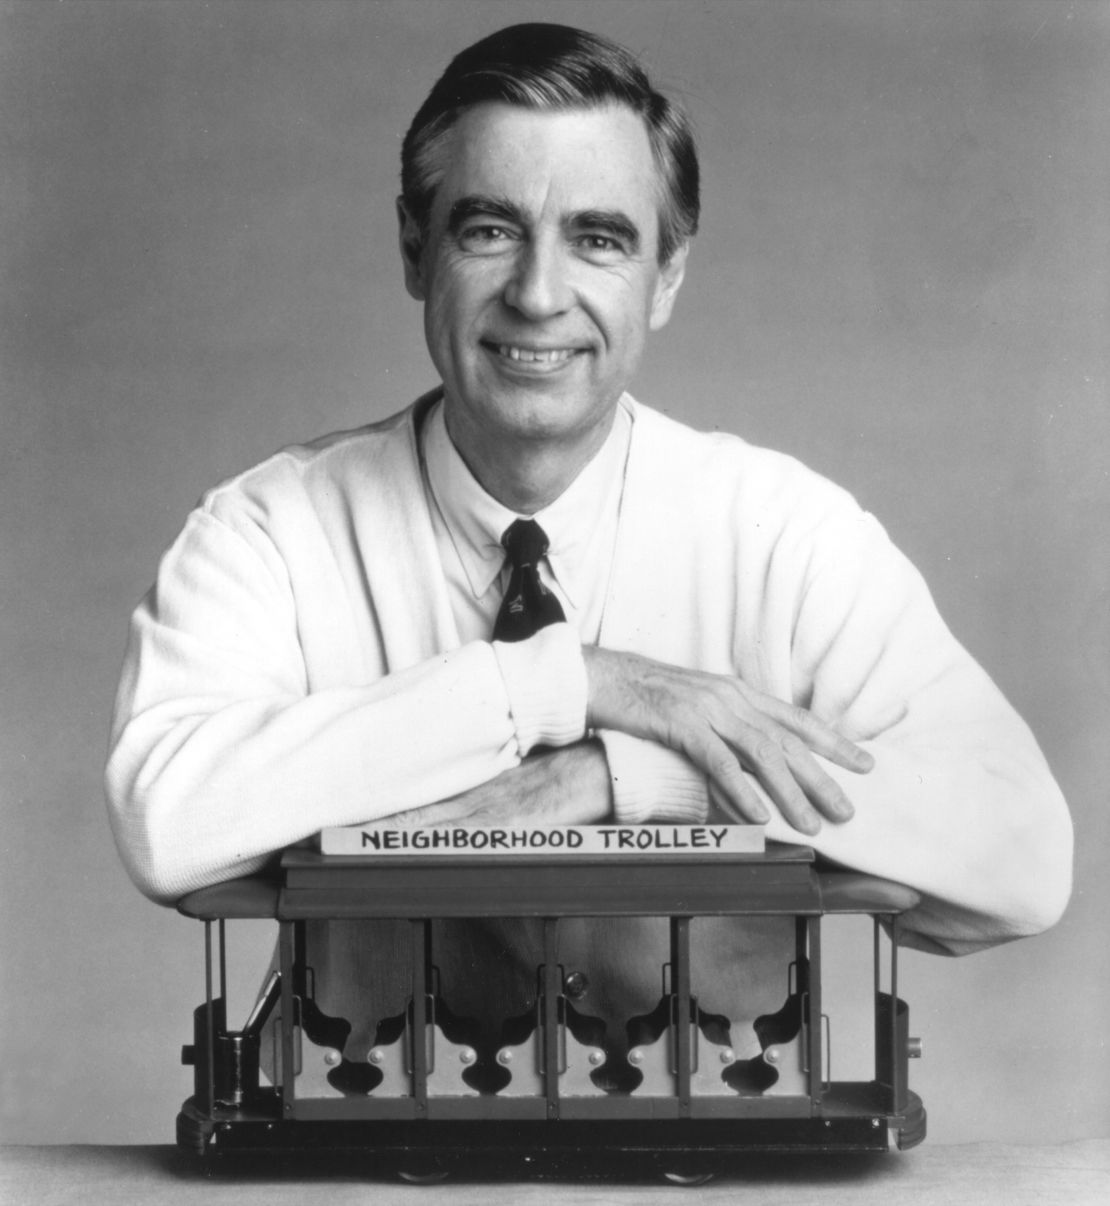 Now displayed at the Smithsonian National Museum of American History, the sweater was one of many in Mr. Rogers' wardrobe, most hand-knitted by his mother, Nancy McFeely Rogers.